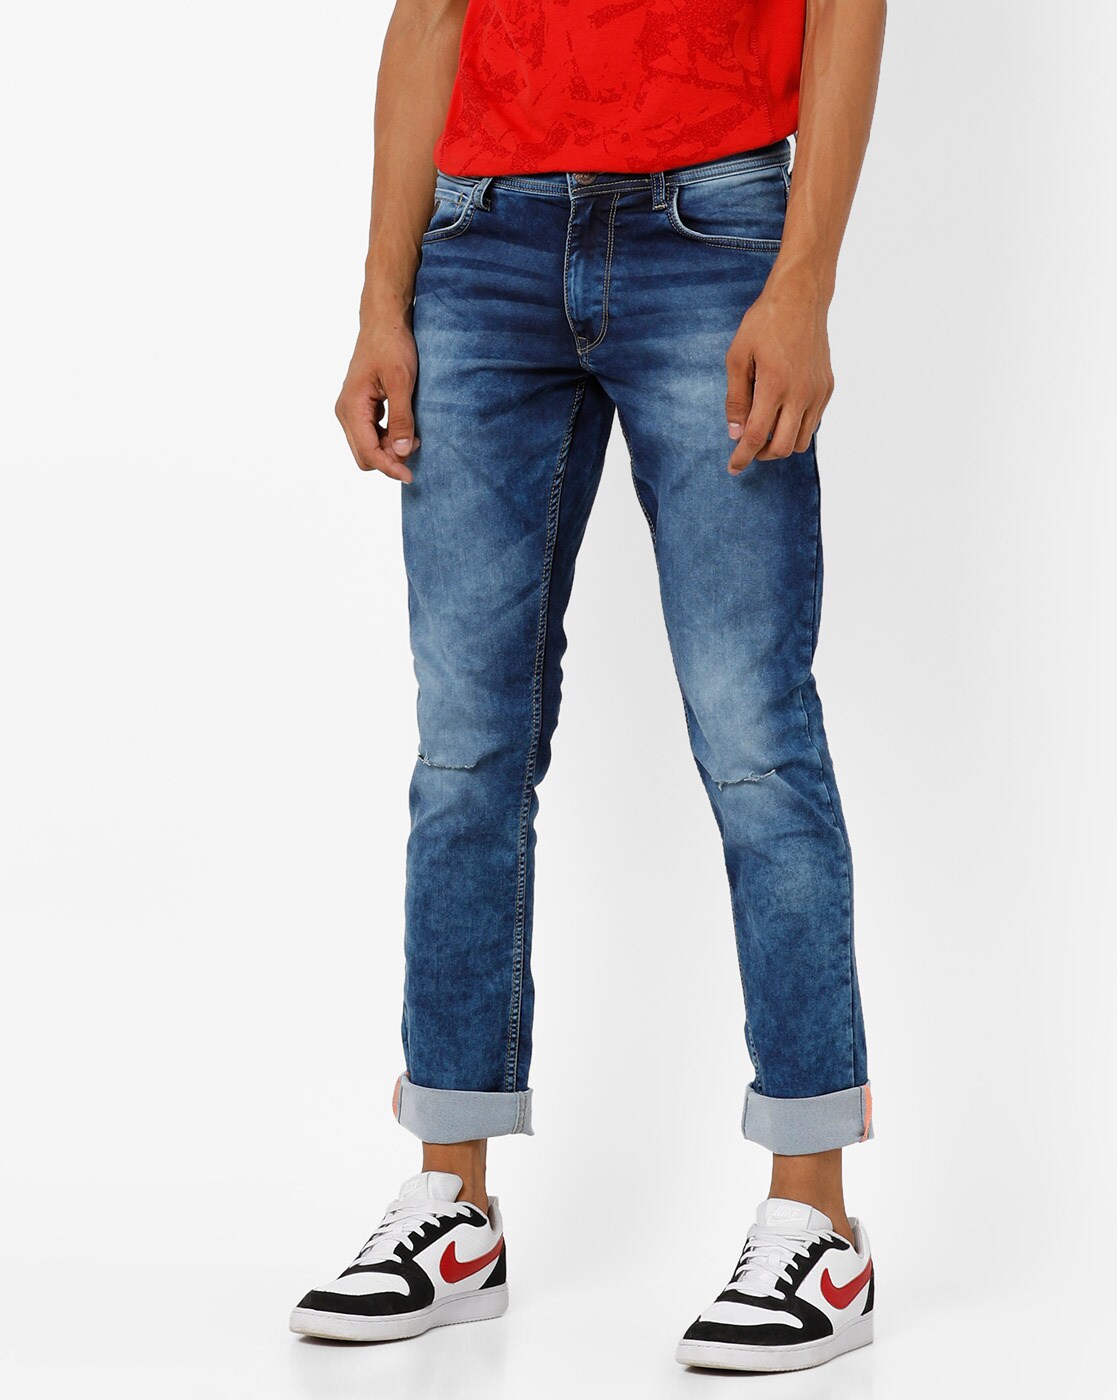 men's relaxed fit ripped jeans